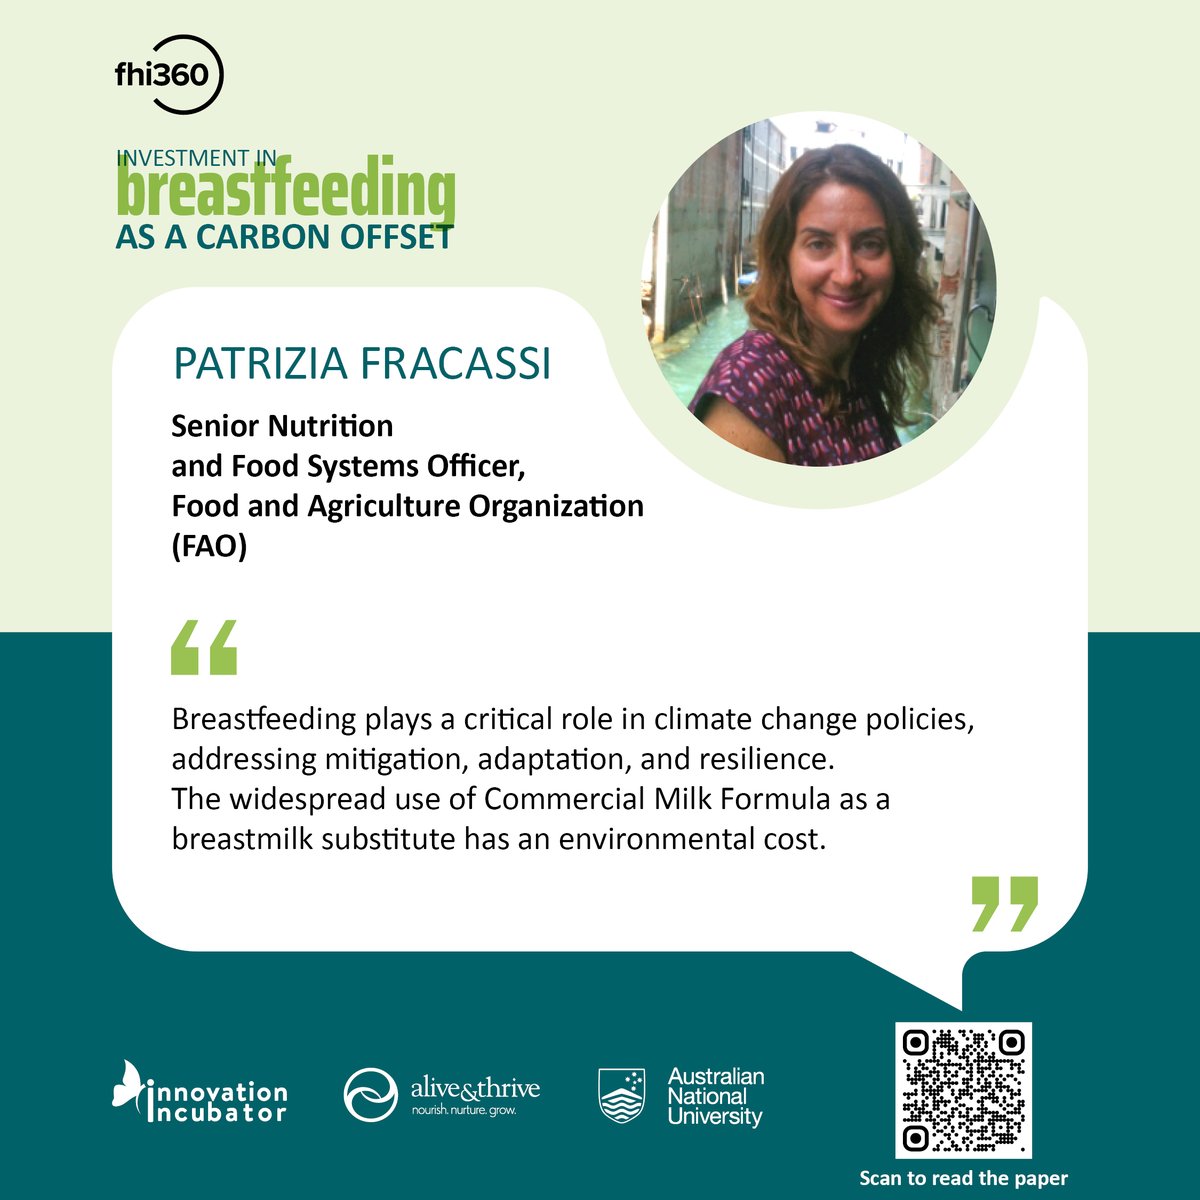 “Breastfeeding plays a critical role in climate change policies, addressing mitigation, adaptation, and resilience. The widespread use of Commercial Milk Formula as a breastmilk substitute has an environmental cost.” @pat_fracassi 

bit.ly/Breastfeedinga… 
#GreenFeedingTool